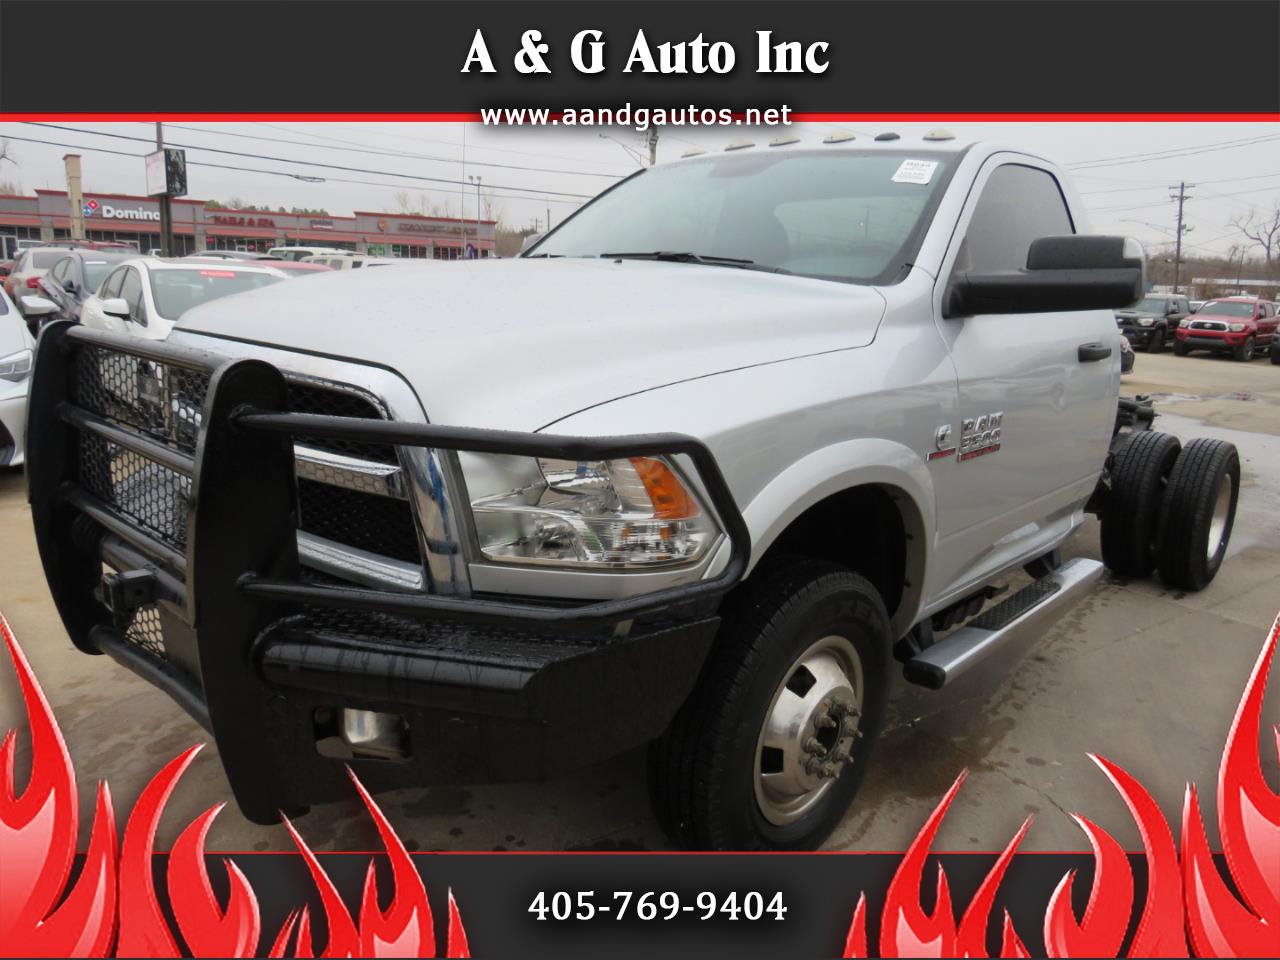 2017 Dodge Ram 3500 for sale in Oklahoma City OK 73141 by A & G Auto Inc